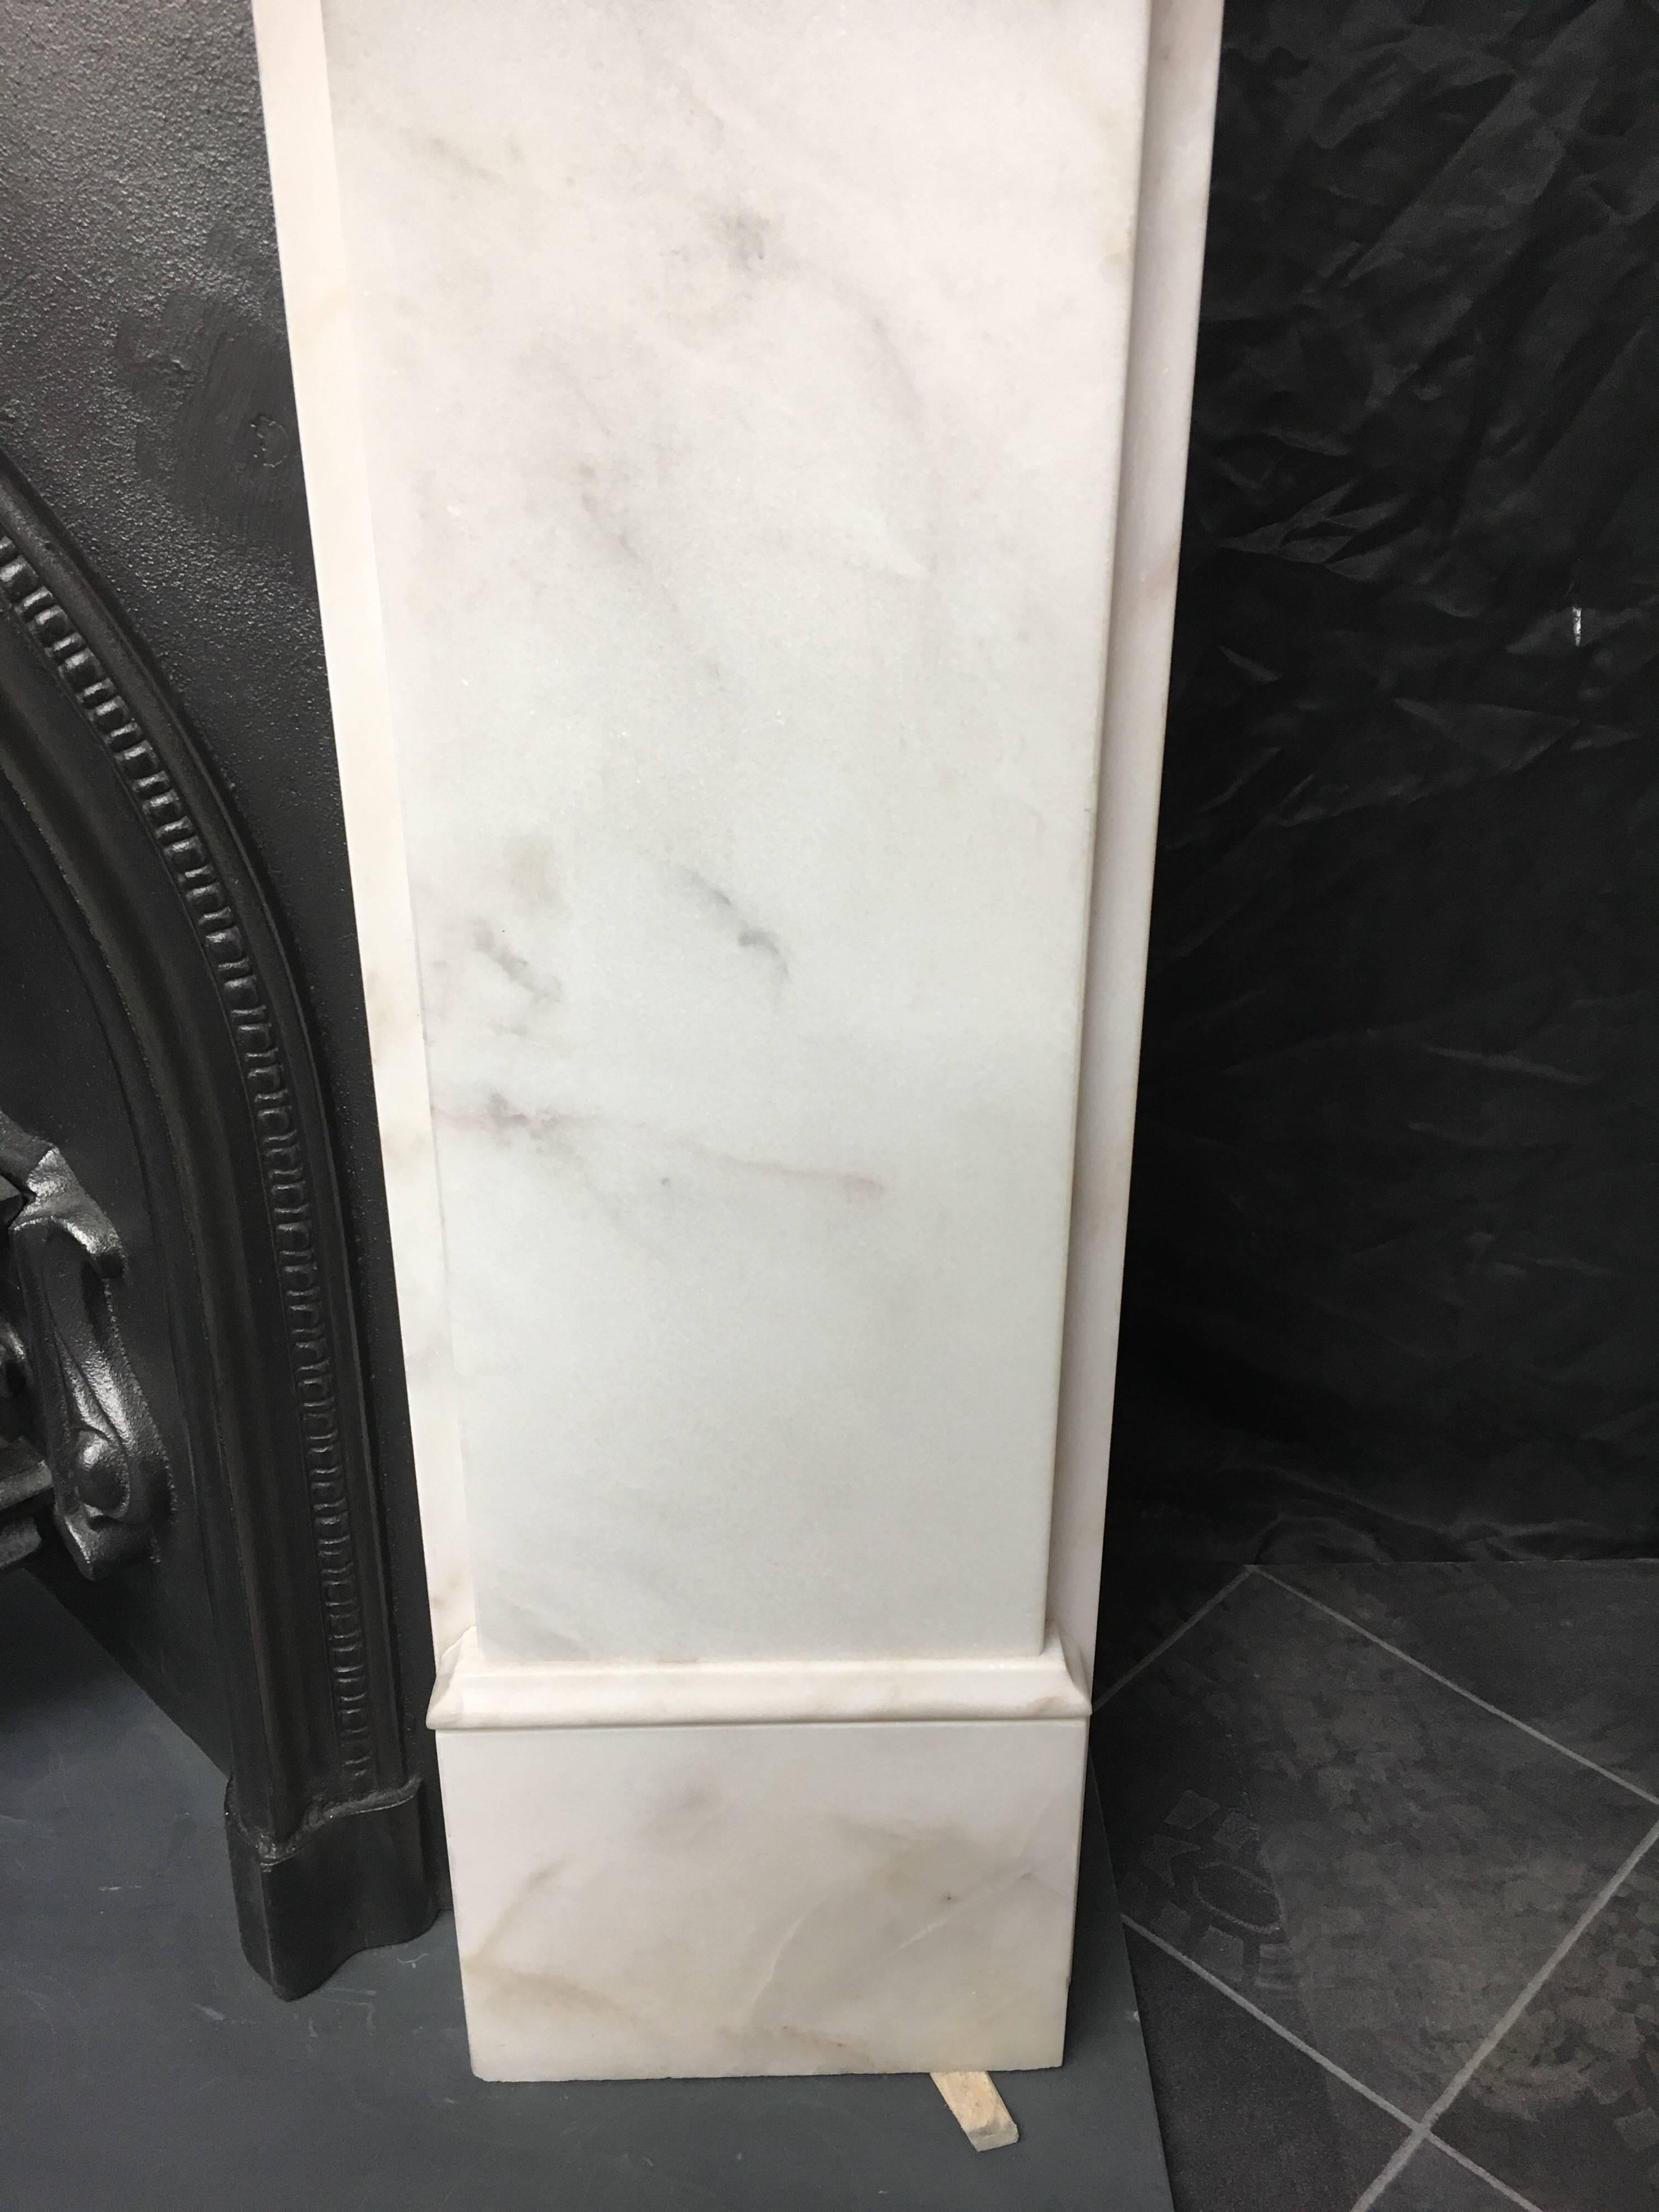 A fine marble period corbel fireplace surround complete with its original London arch cast iron interior insert. A timeless classic combination.
English, circa 1960

Fireplace opening: 900mm wide x 950mm high.